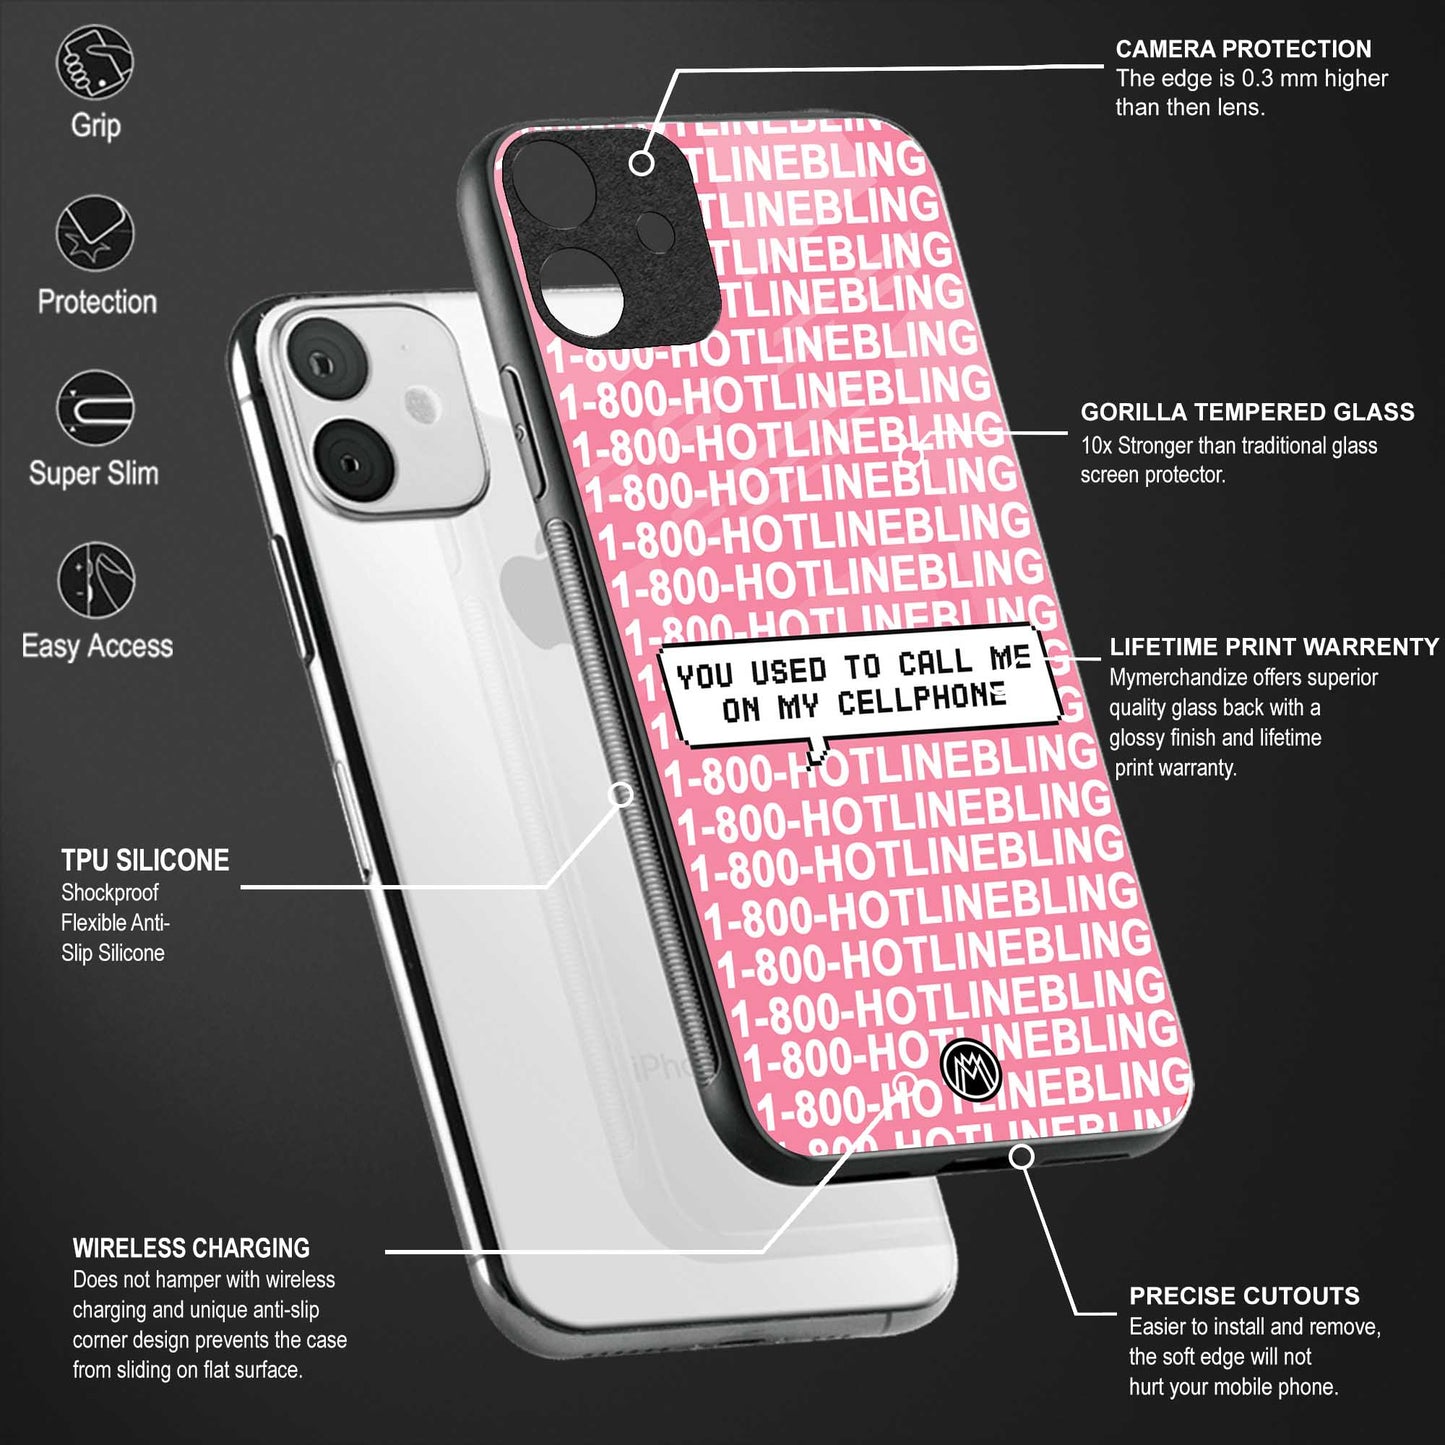 1800 hotline bling phone cover for redmi note 9 pro max 